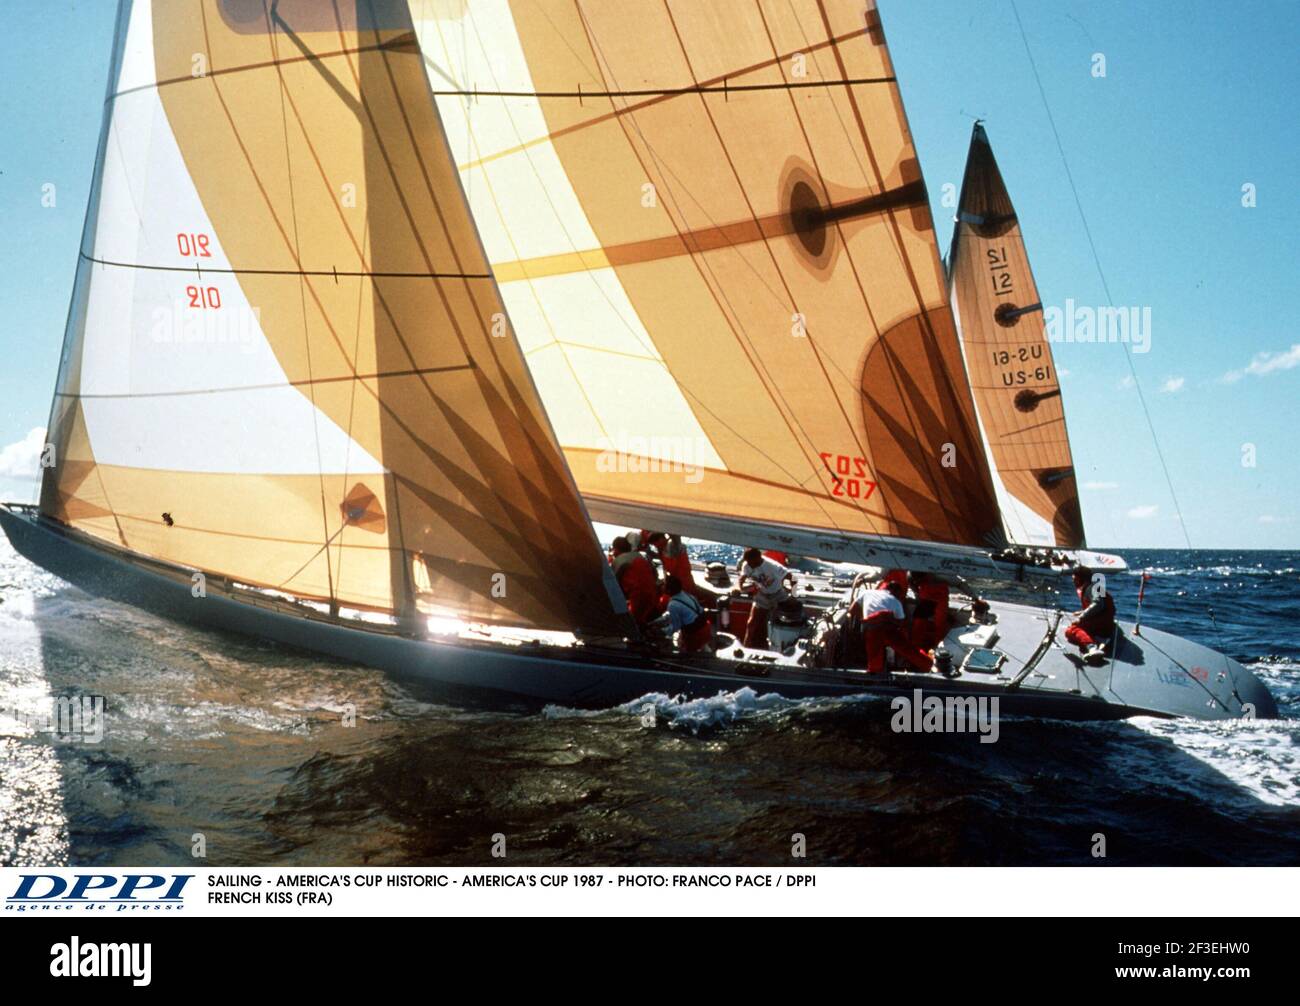 SEGELN - AMERICA'S CUP HISTORIC - AMERICA'S CUP 1987 - FOTO: FRANCO PACE / DPPI FRENCH KISS (FRA) Stockfoto